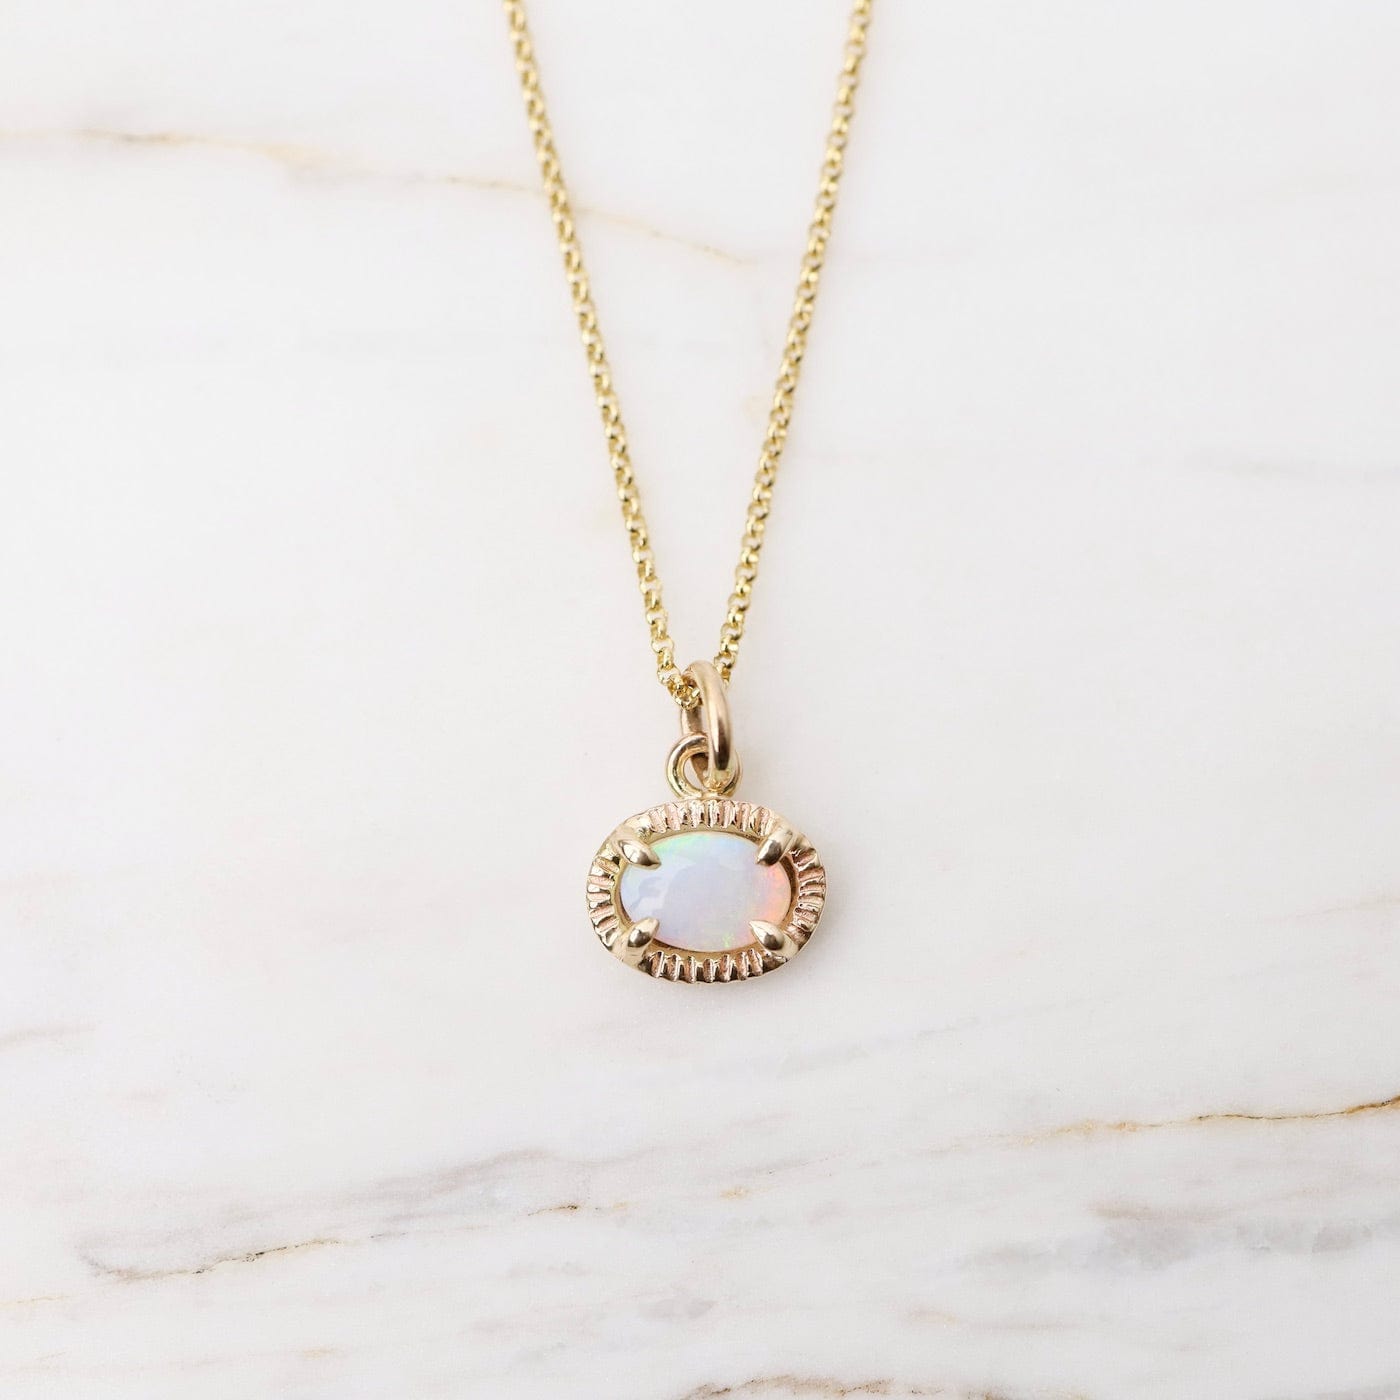 Vintage Opal Necklace, Opal Necklace Gold, Natural Opal Pendant Necklace,  White Opal Necklace, Necklace for Women, Anniversary Gifts for Her - Etsy | Opal  necklace gold, Charm necklace silver, Opal pendant necklace